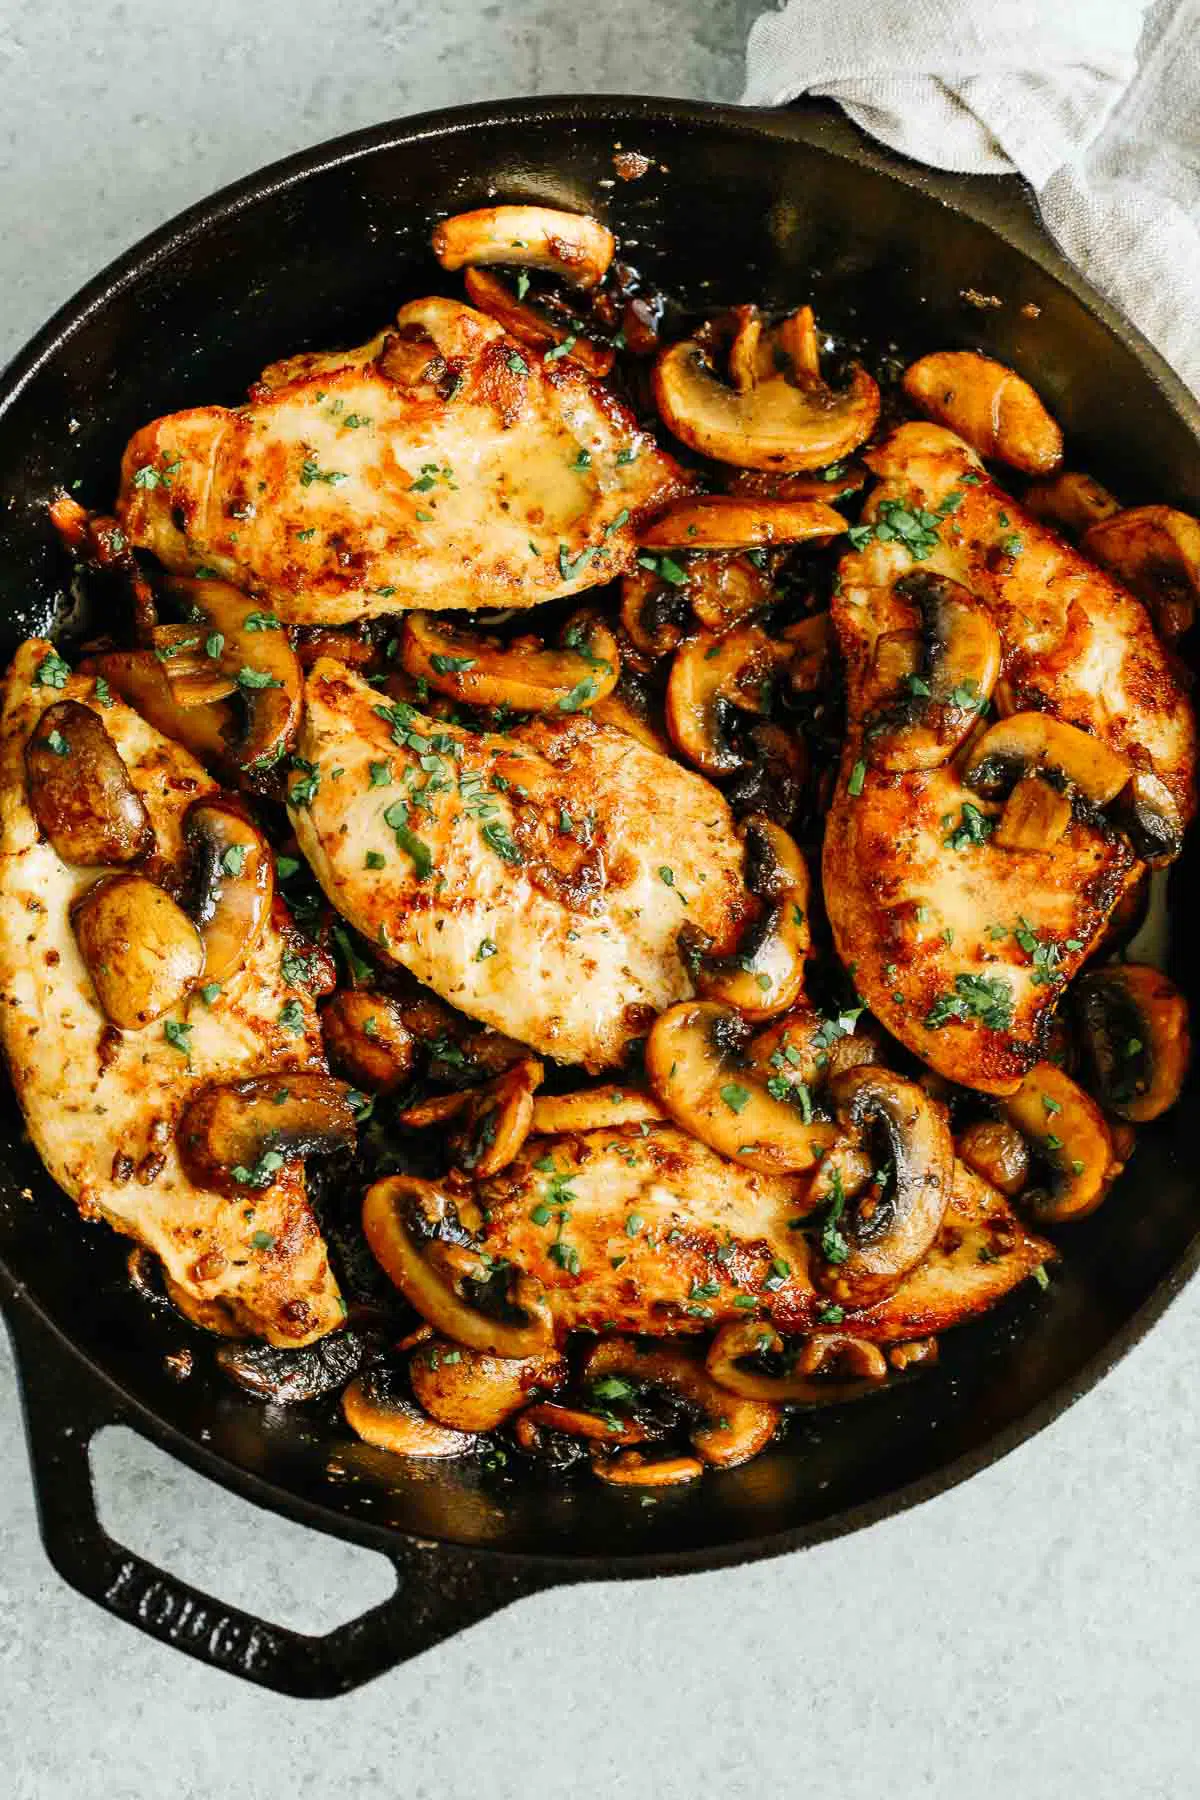 Overhead photo of cooked chicken breasts and mushrooms in a cast iron skillet.